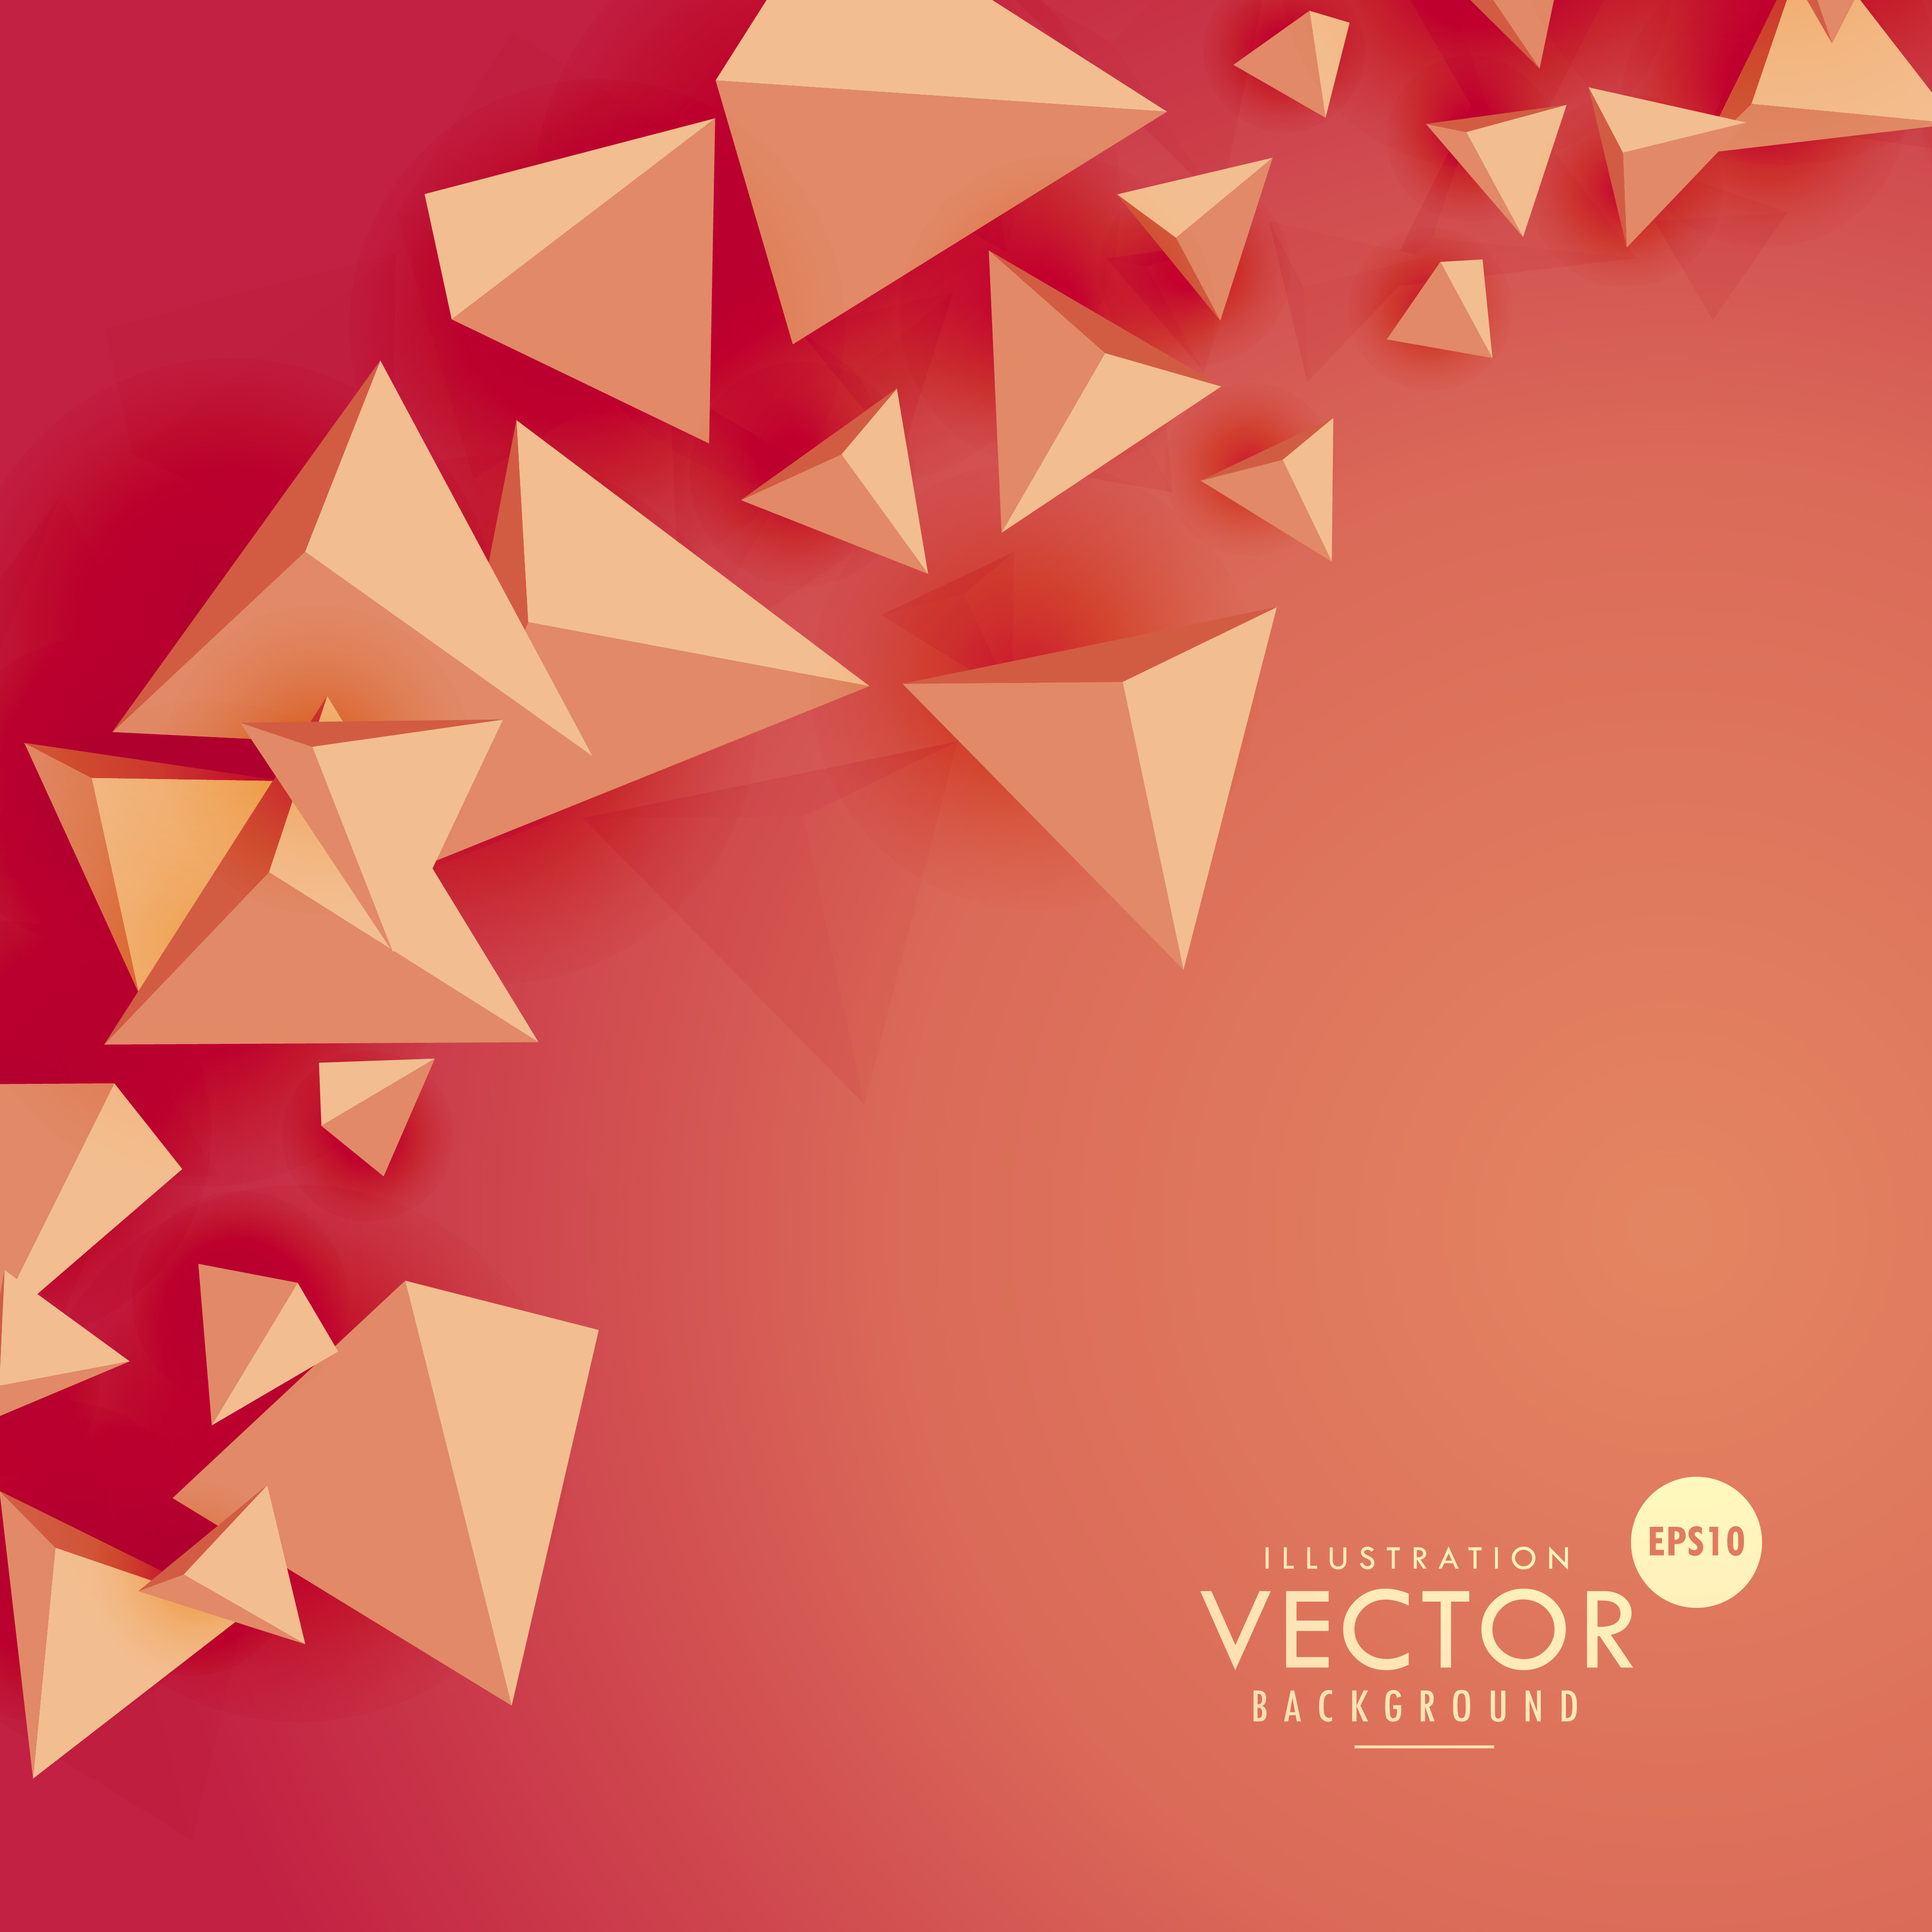 Red Polygon Free Vector Art - (11071 Free Downloads)